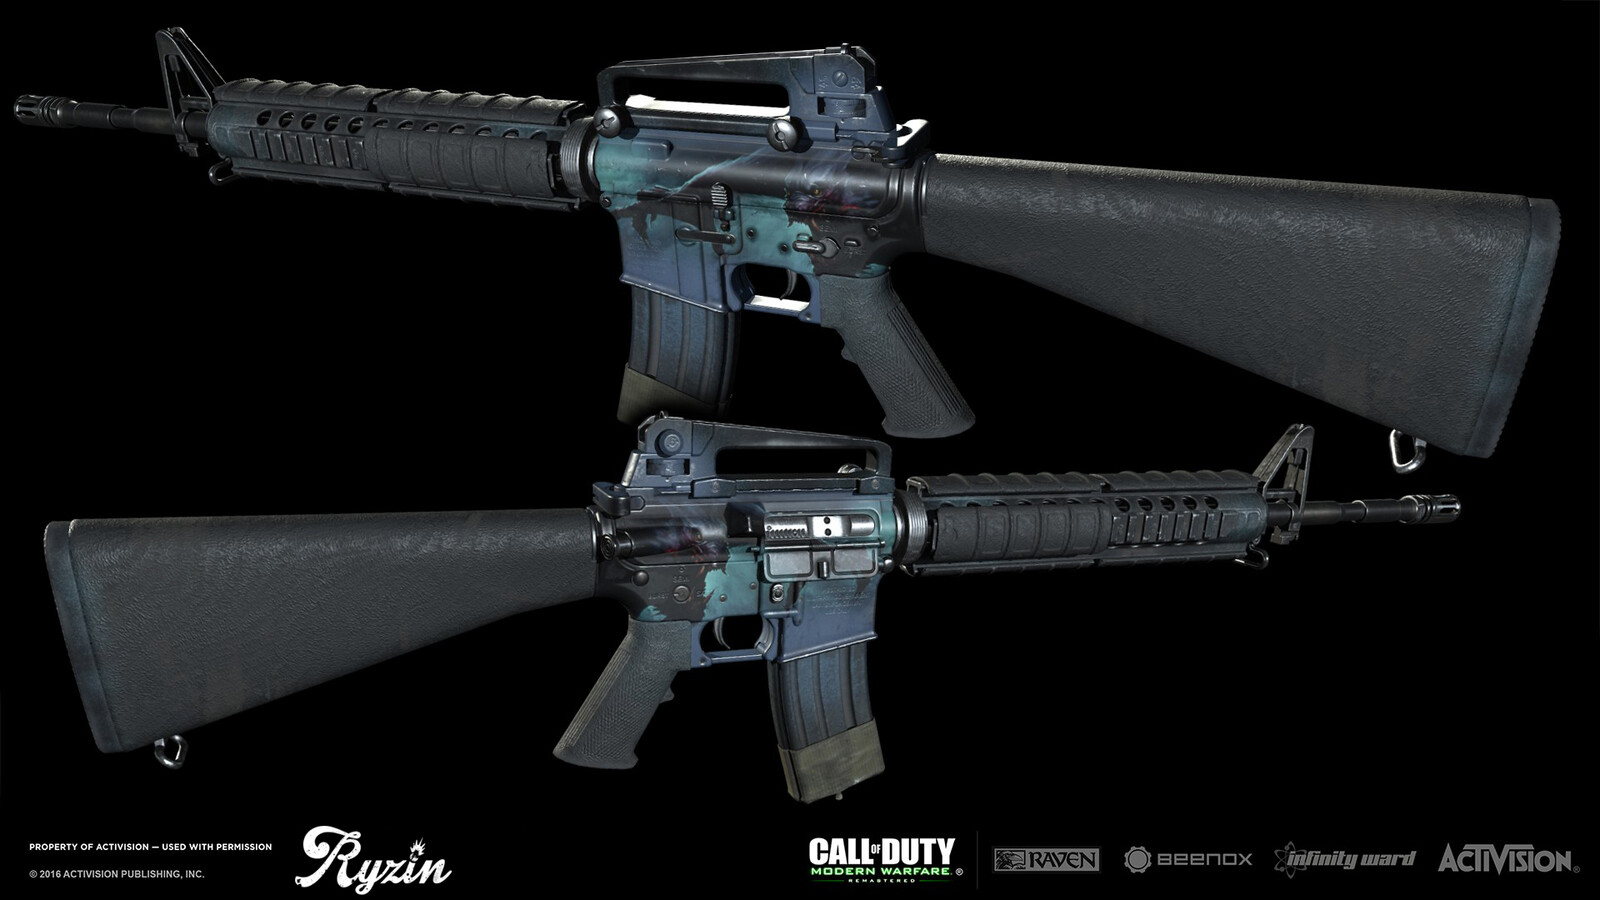 Call of Duty: Modern Warfare Remastered Weapon Skins.